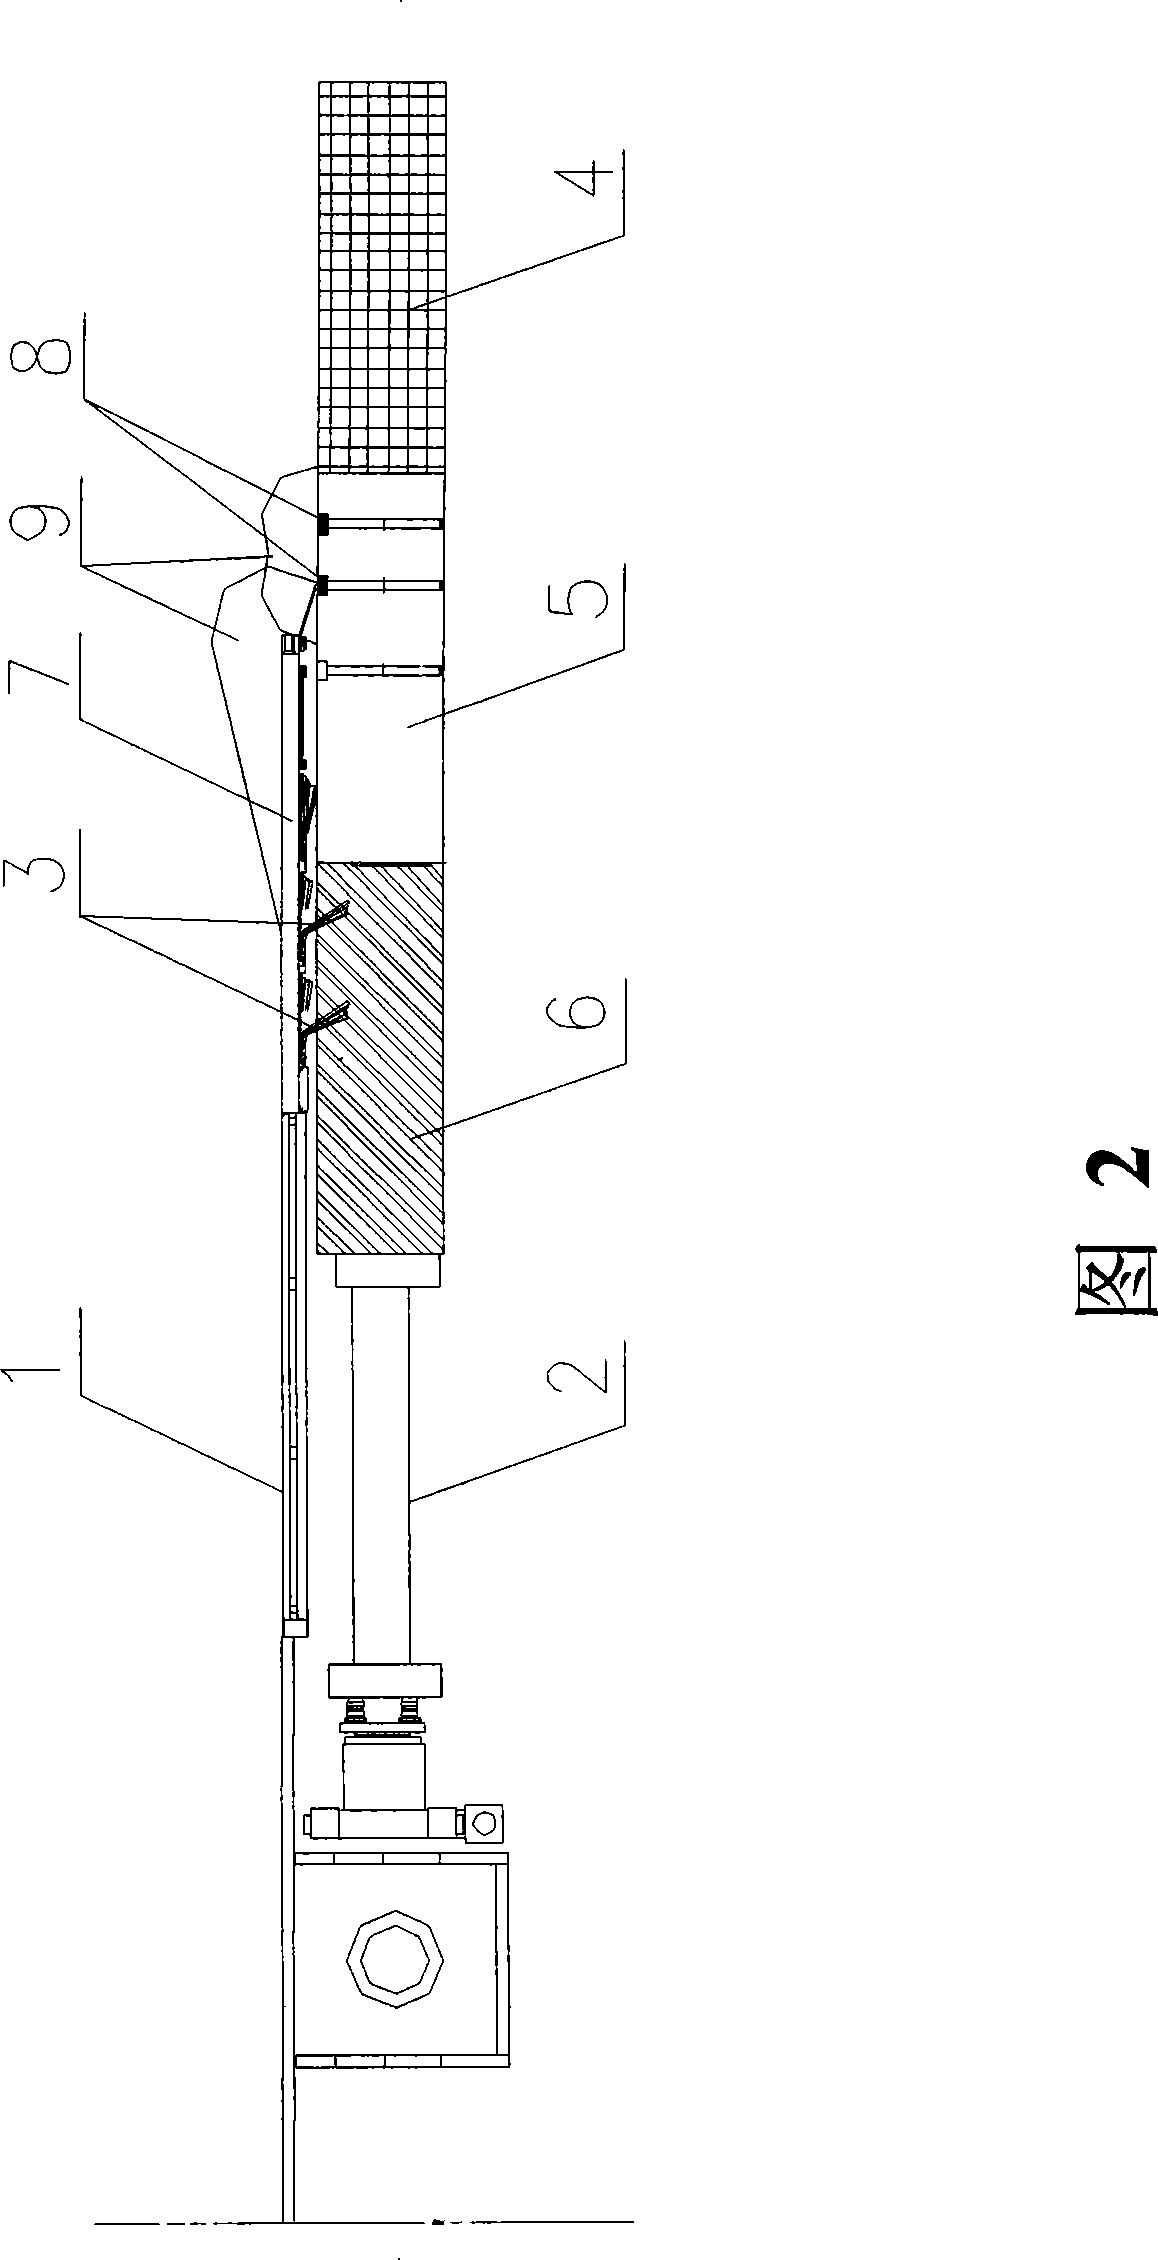 Construction method for exchanging shield ventral brush